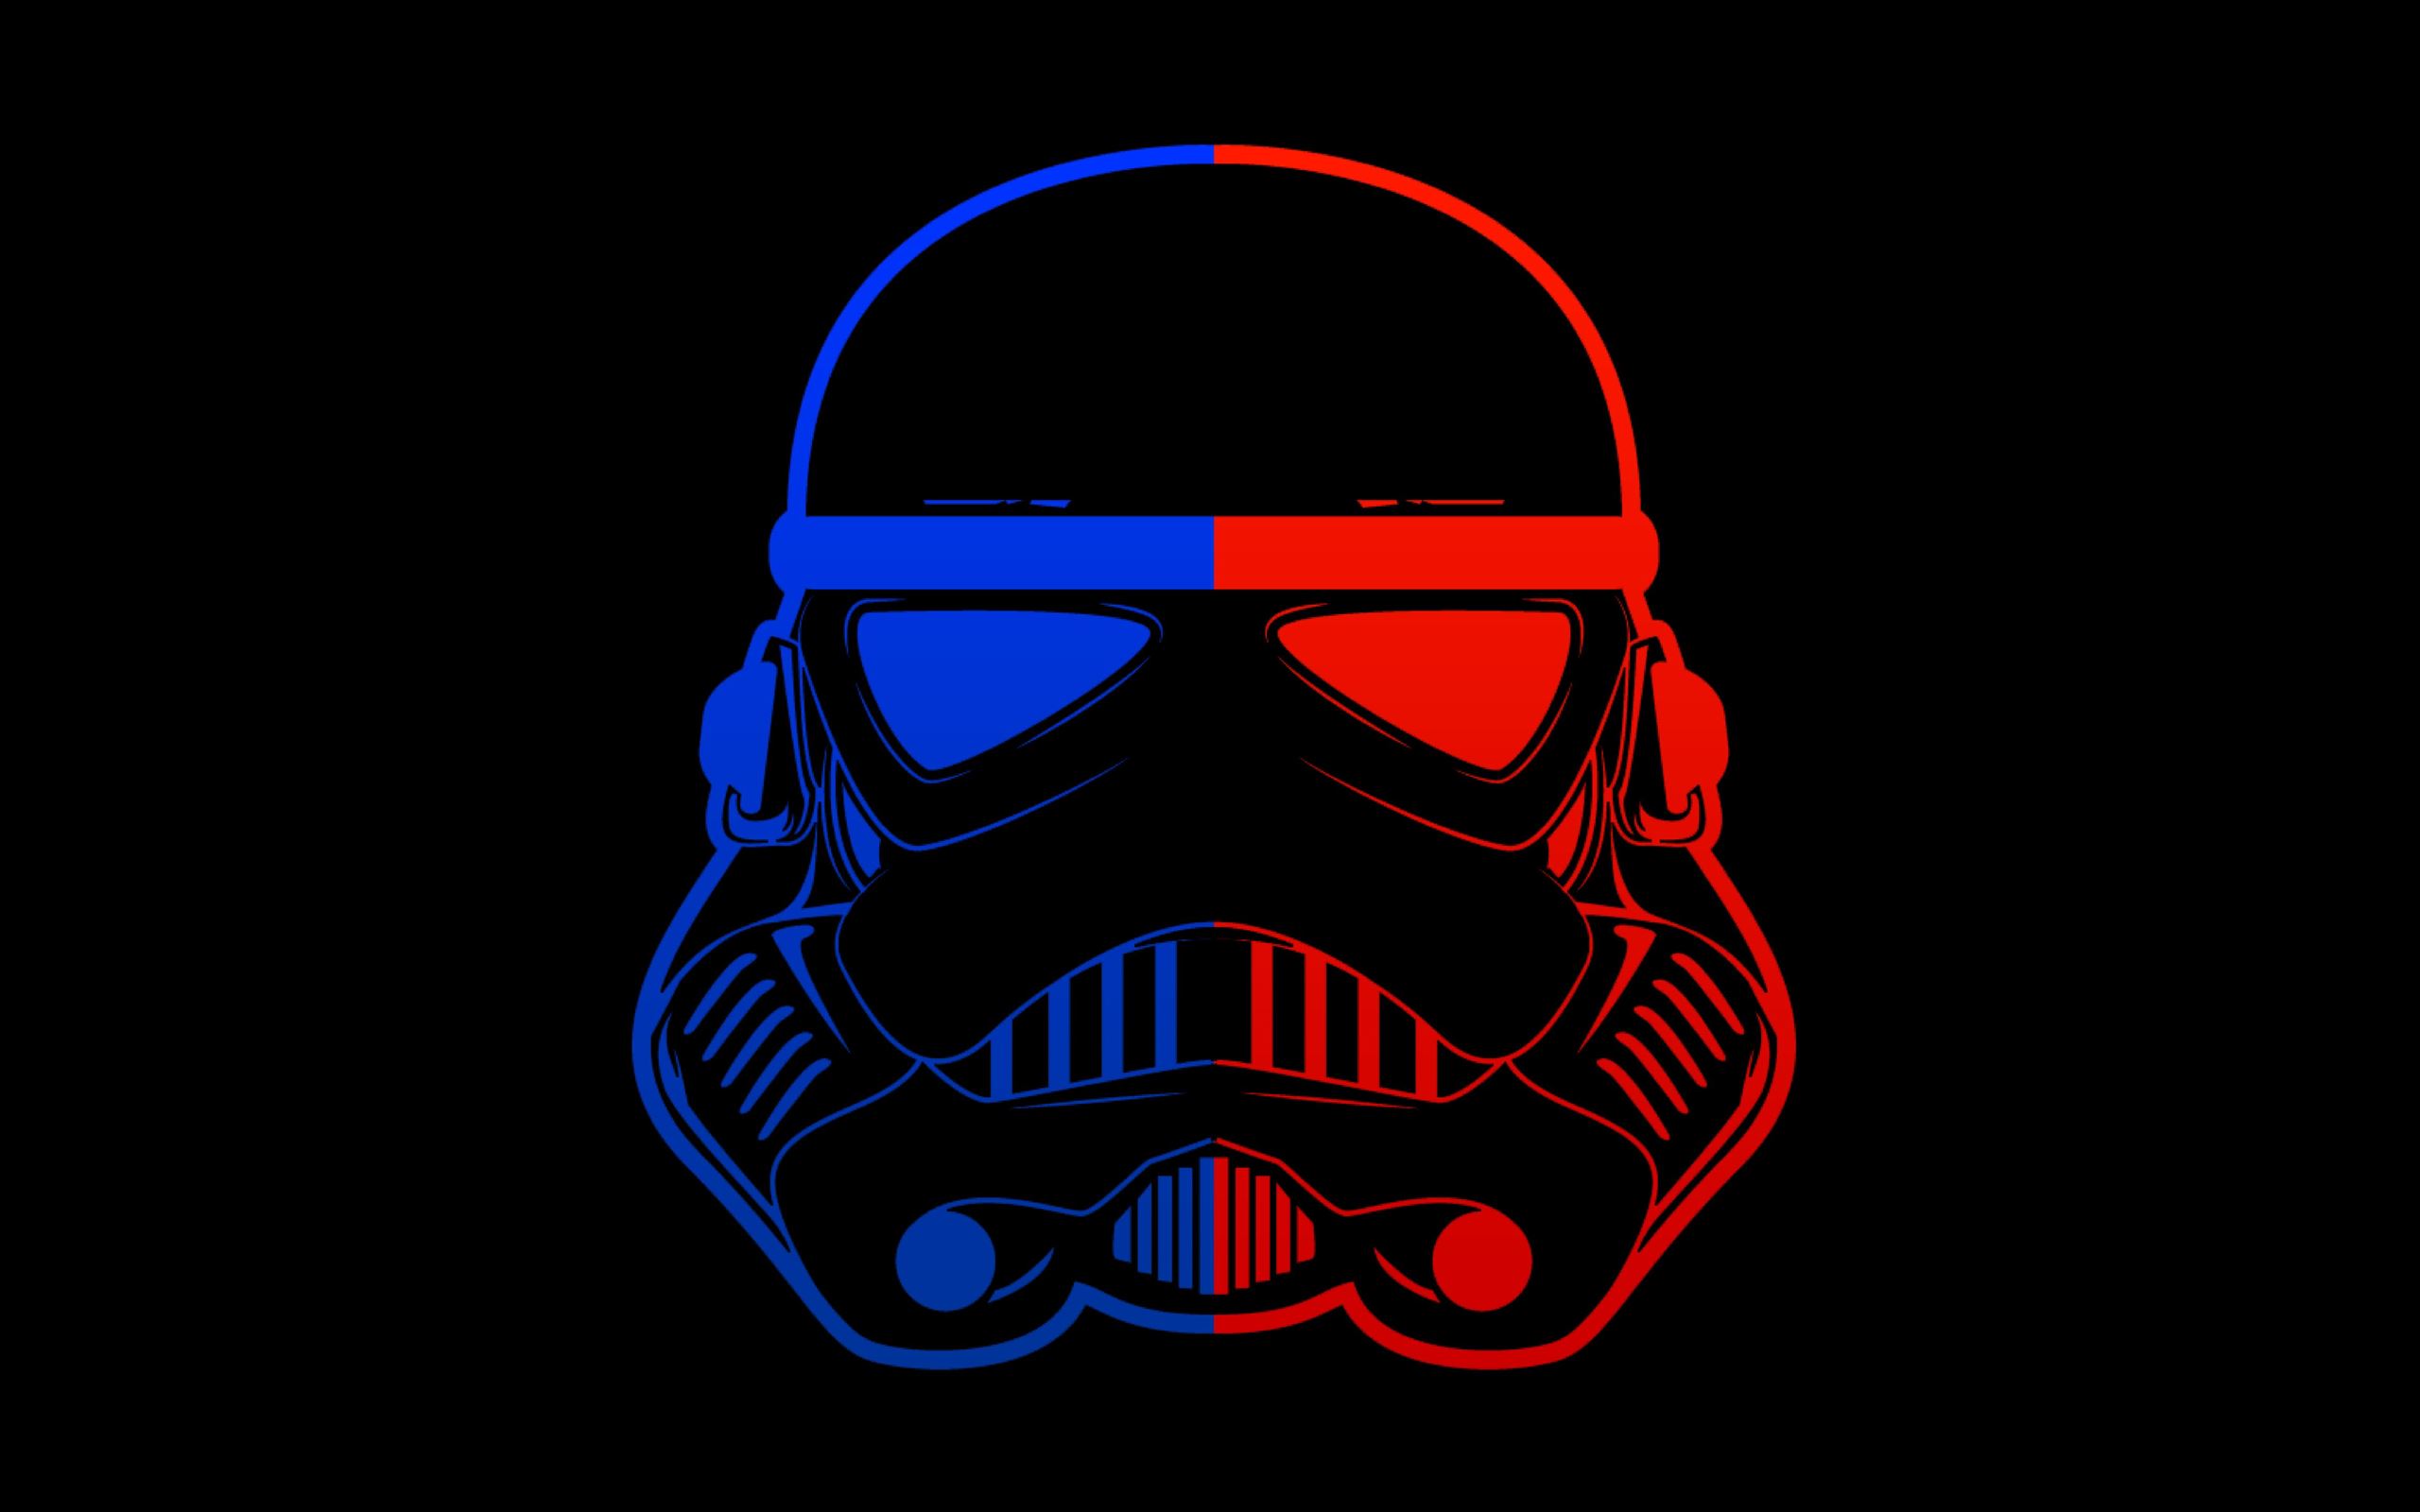 Stormtrooper With Lightsaber 8K Wallpapers